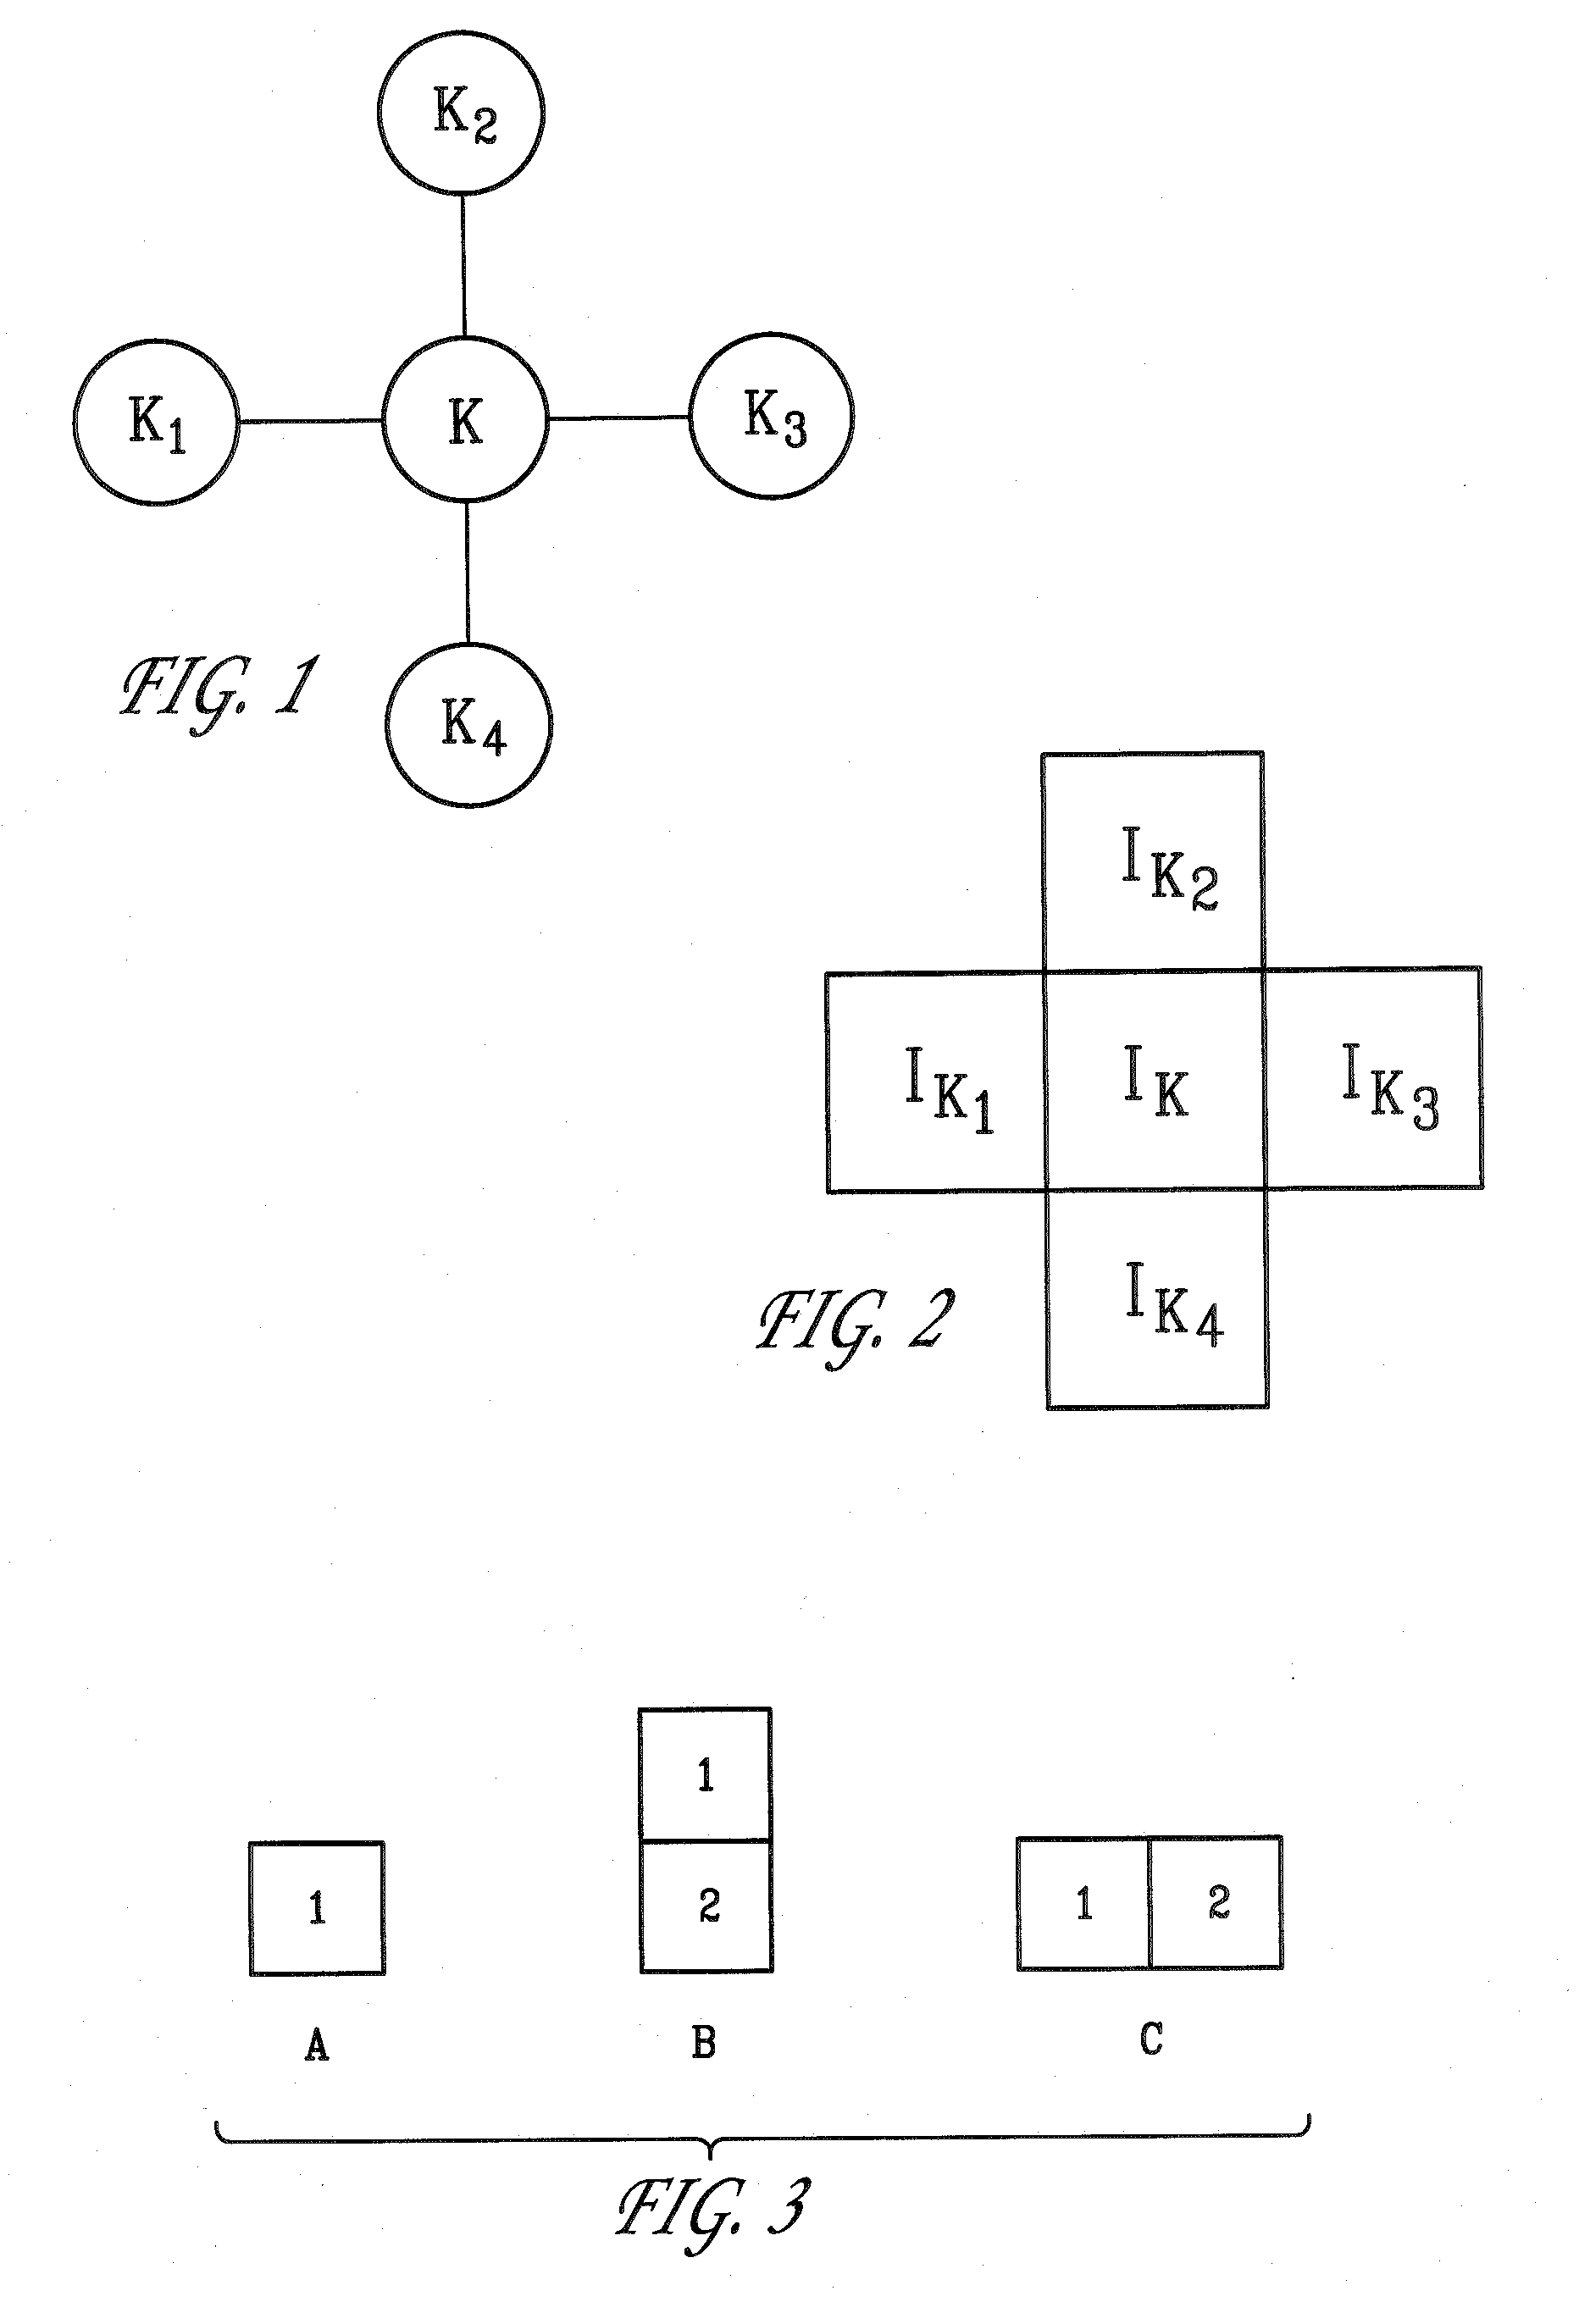 System and method for reduction of speckle noise in an image